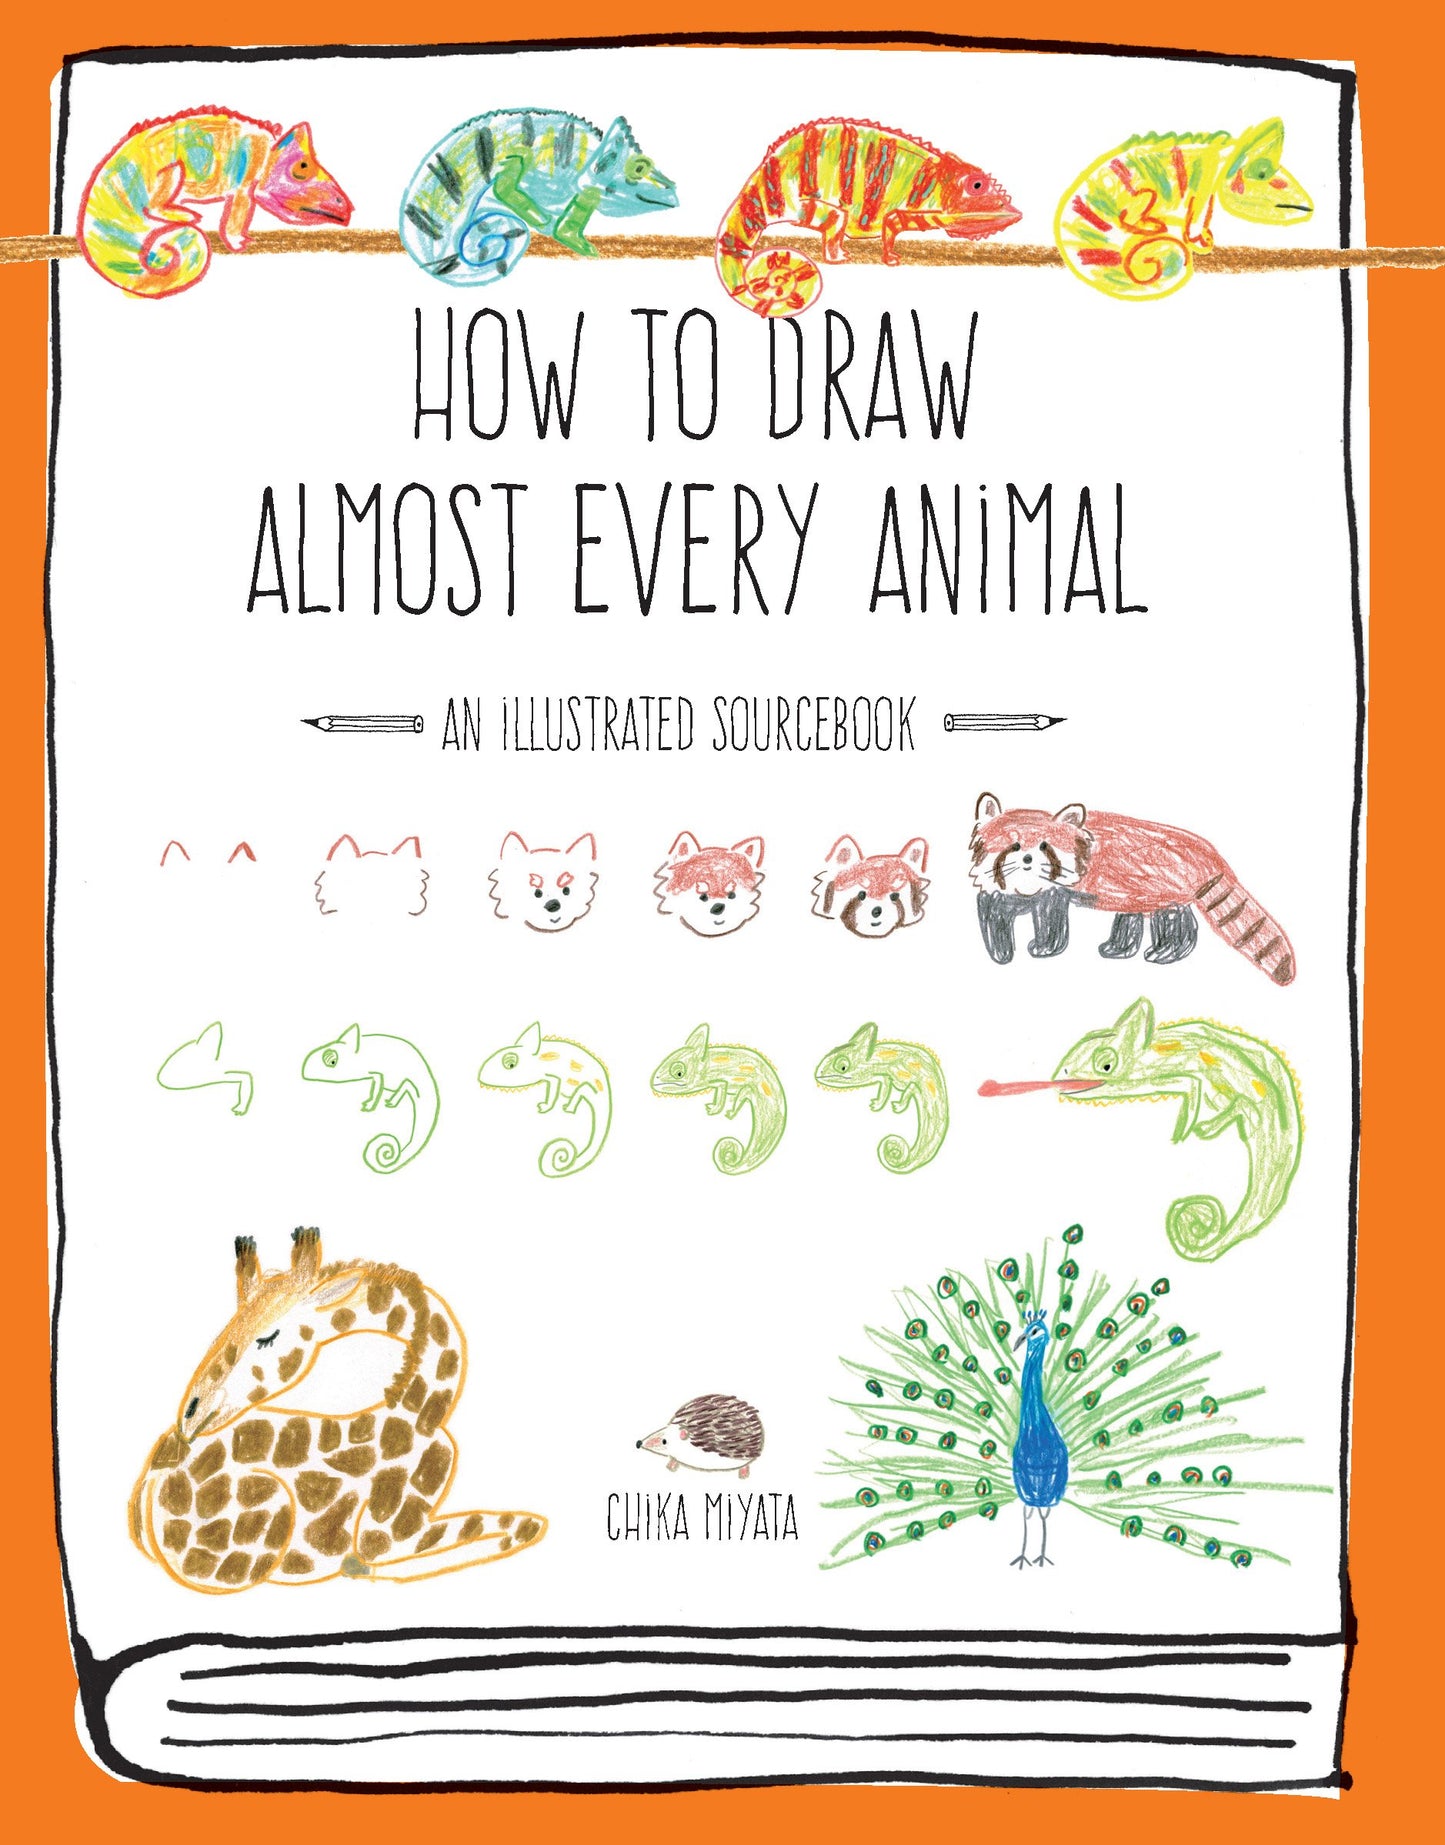 How To Draw Almost Every Animal - An Illustrated Sourcebook